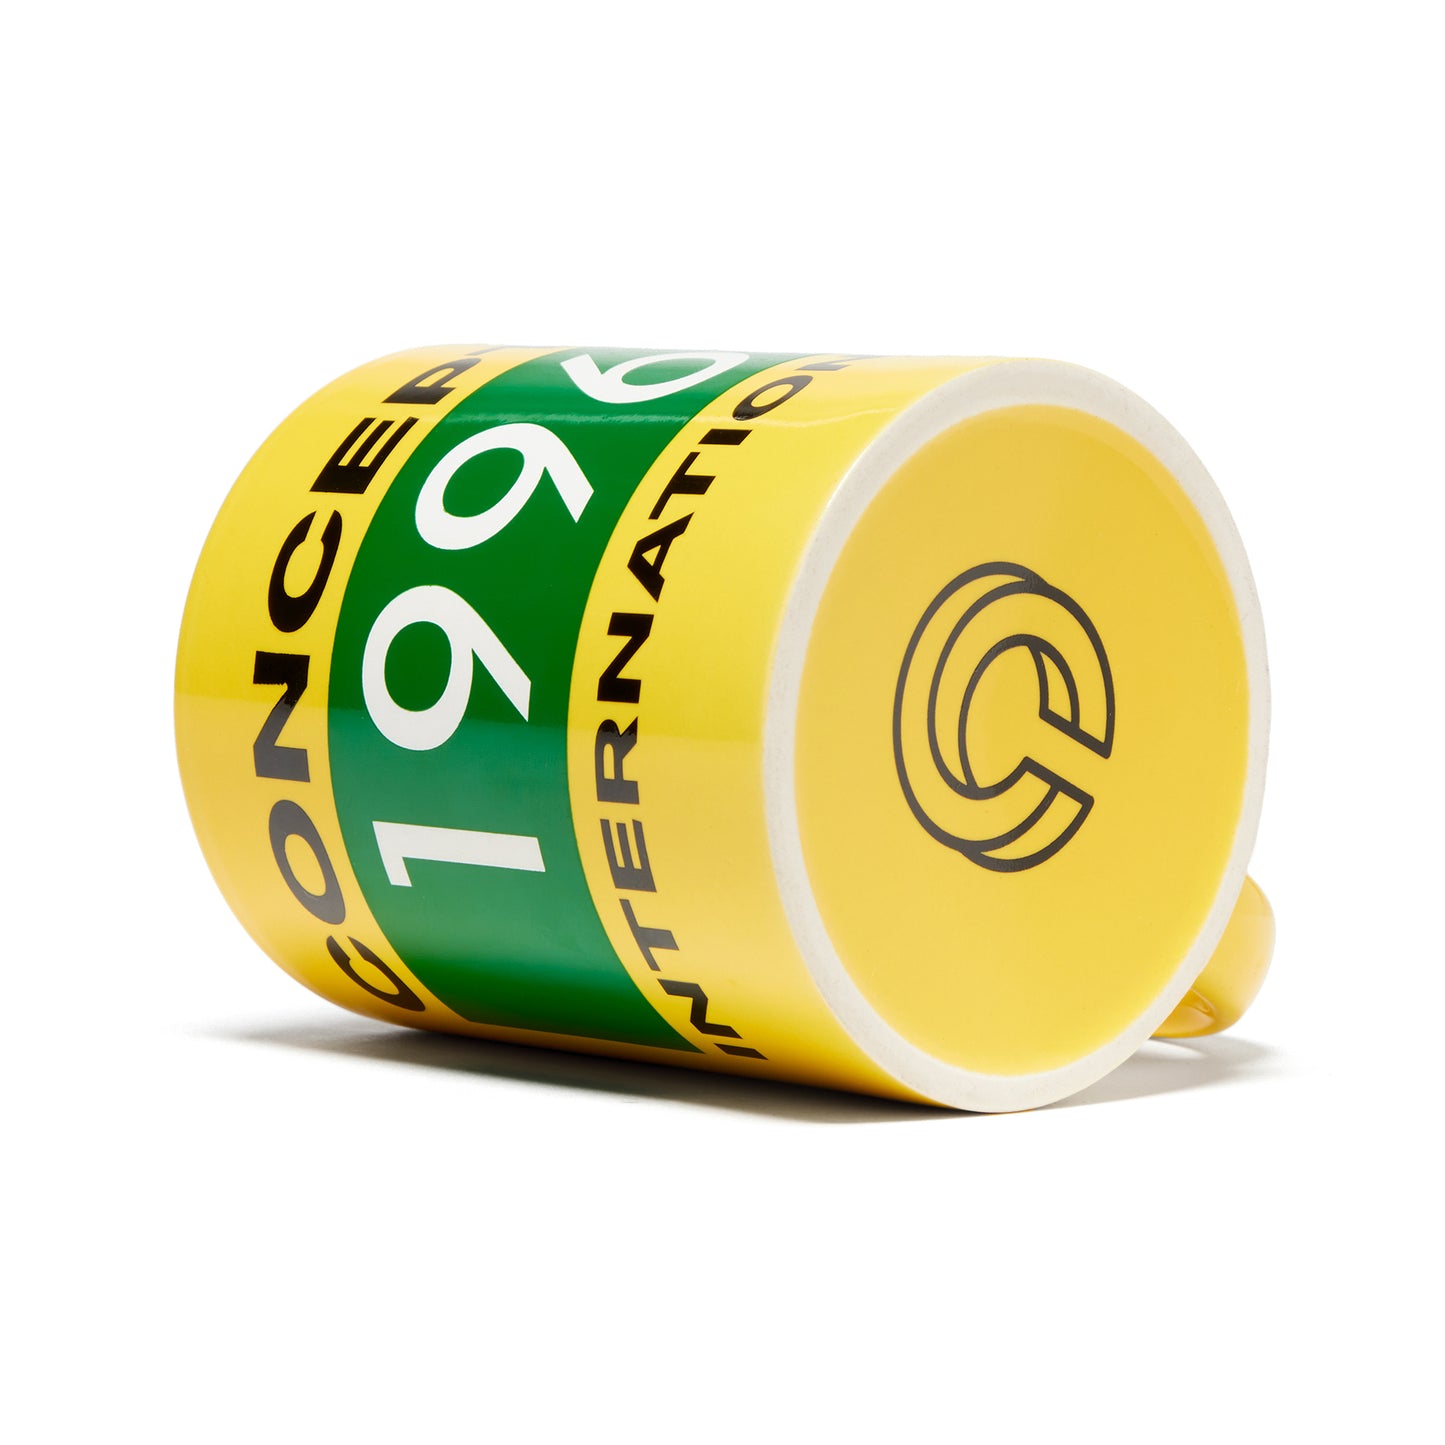 Concepts Intl 1996 Coffee Cup (Yellow)